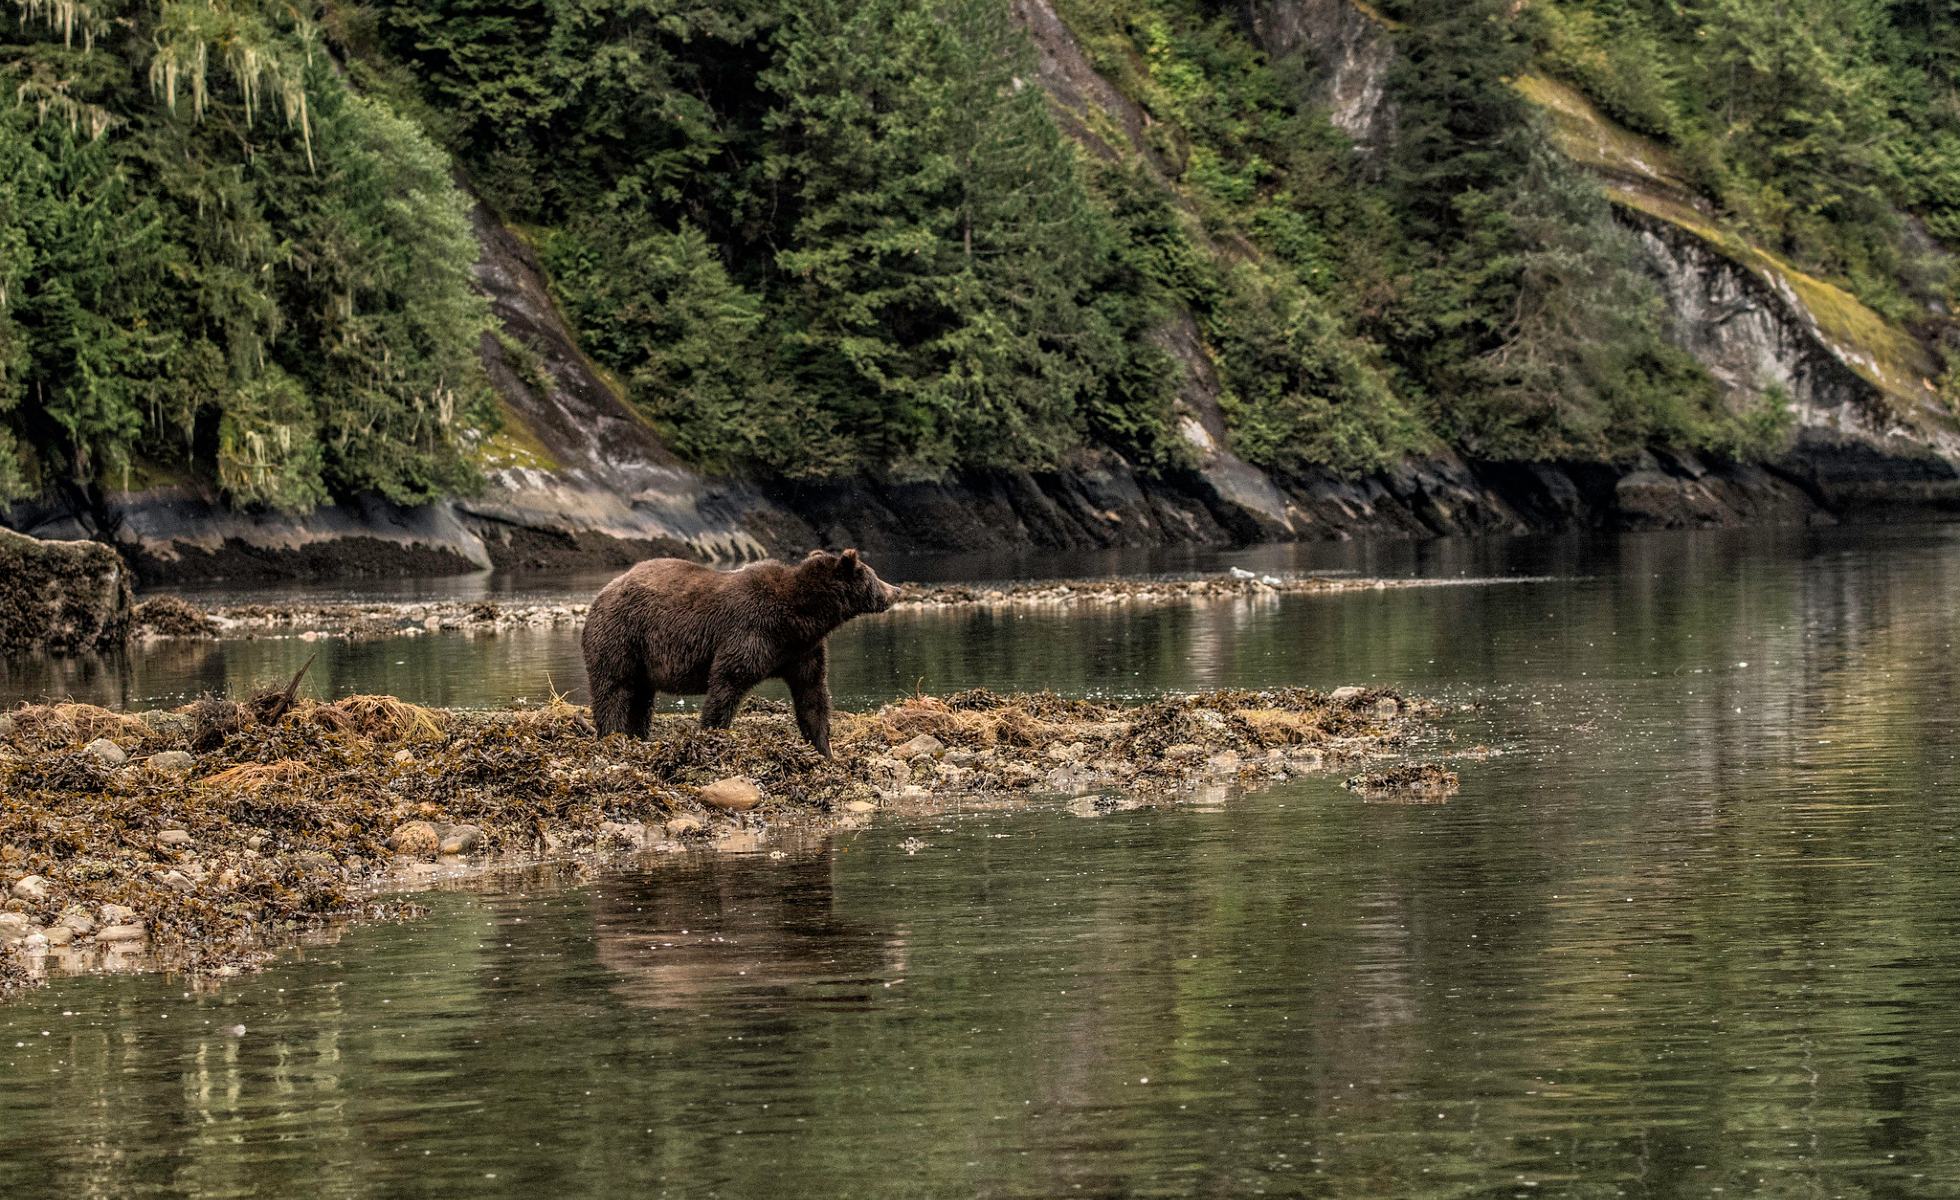 Grizzly bear standing at water's edge